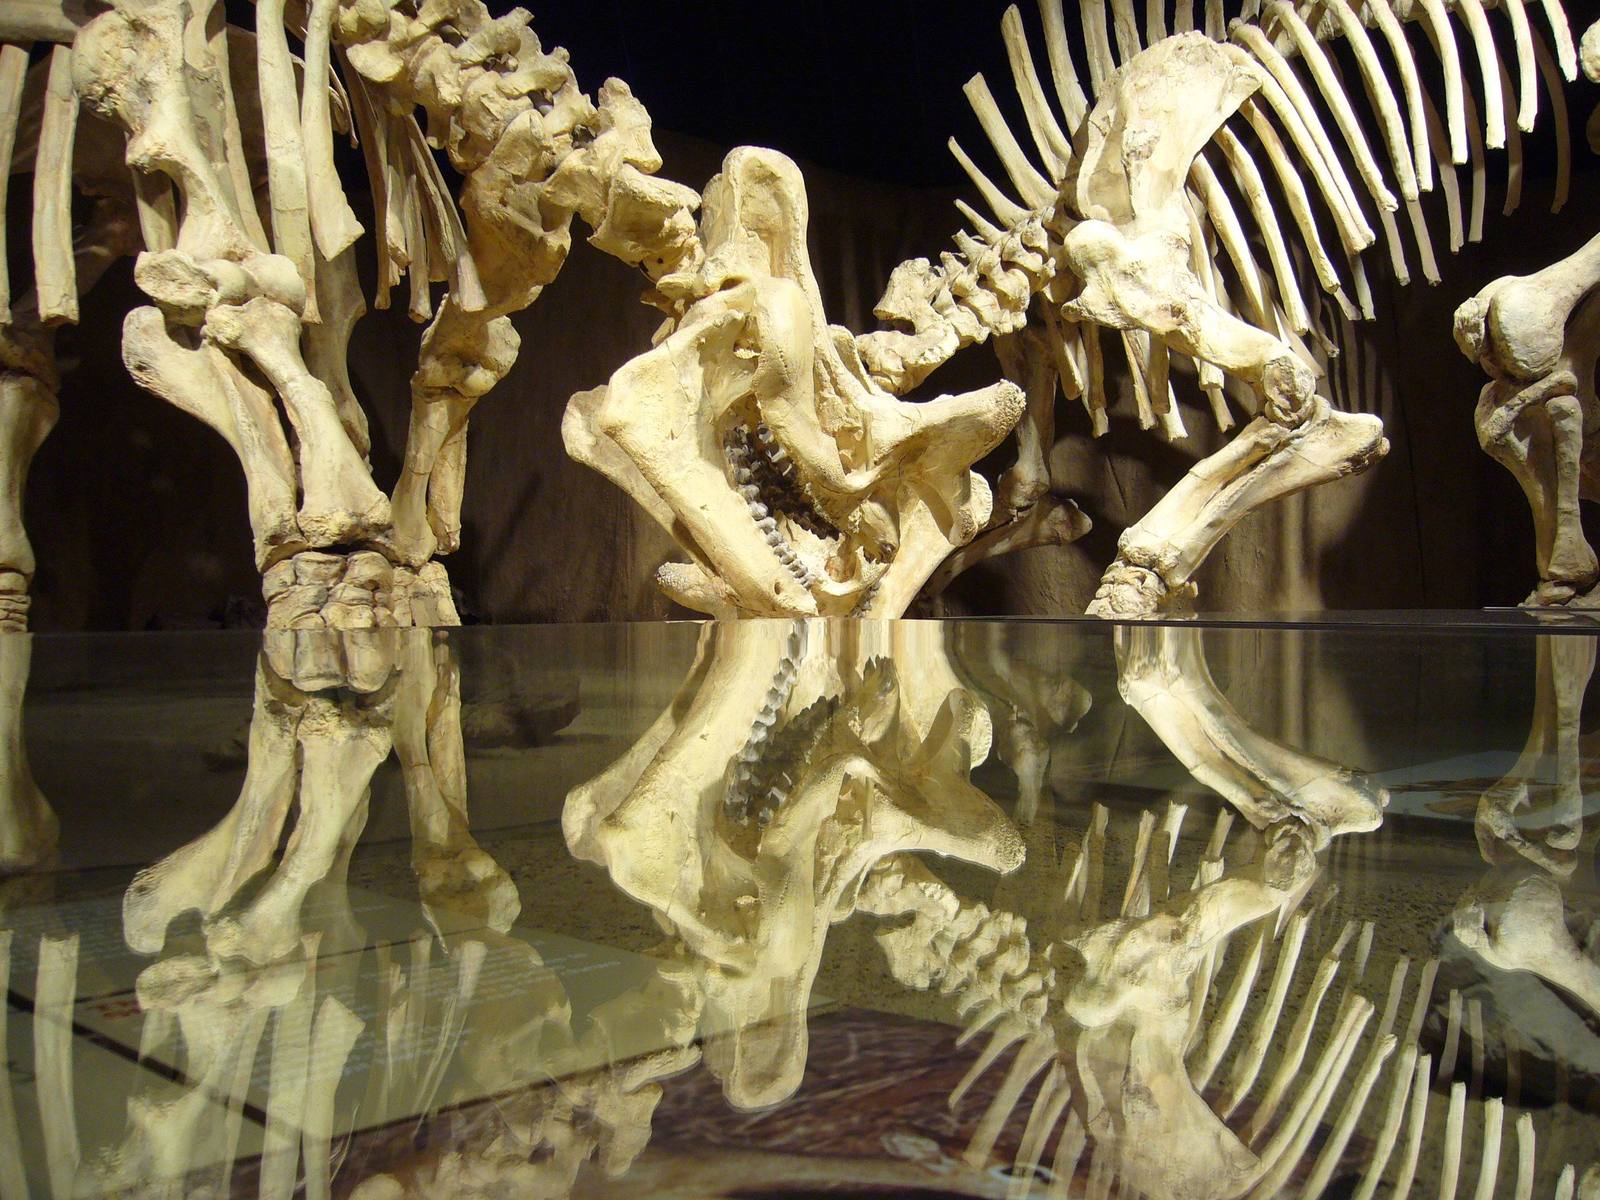 a glass table that has a large group of bones on it